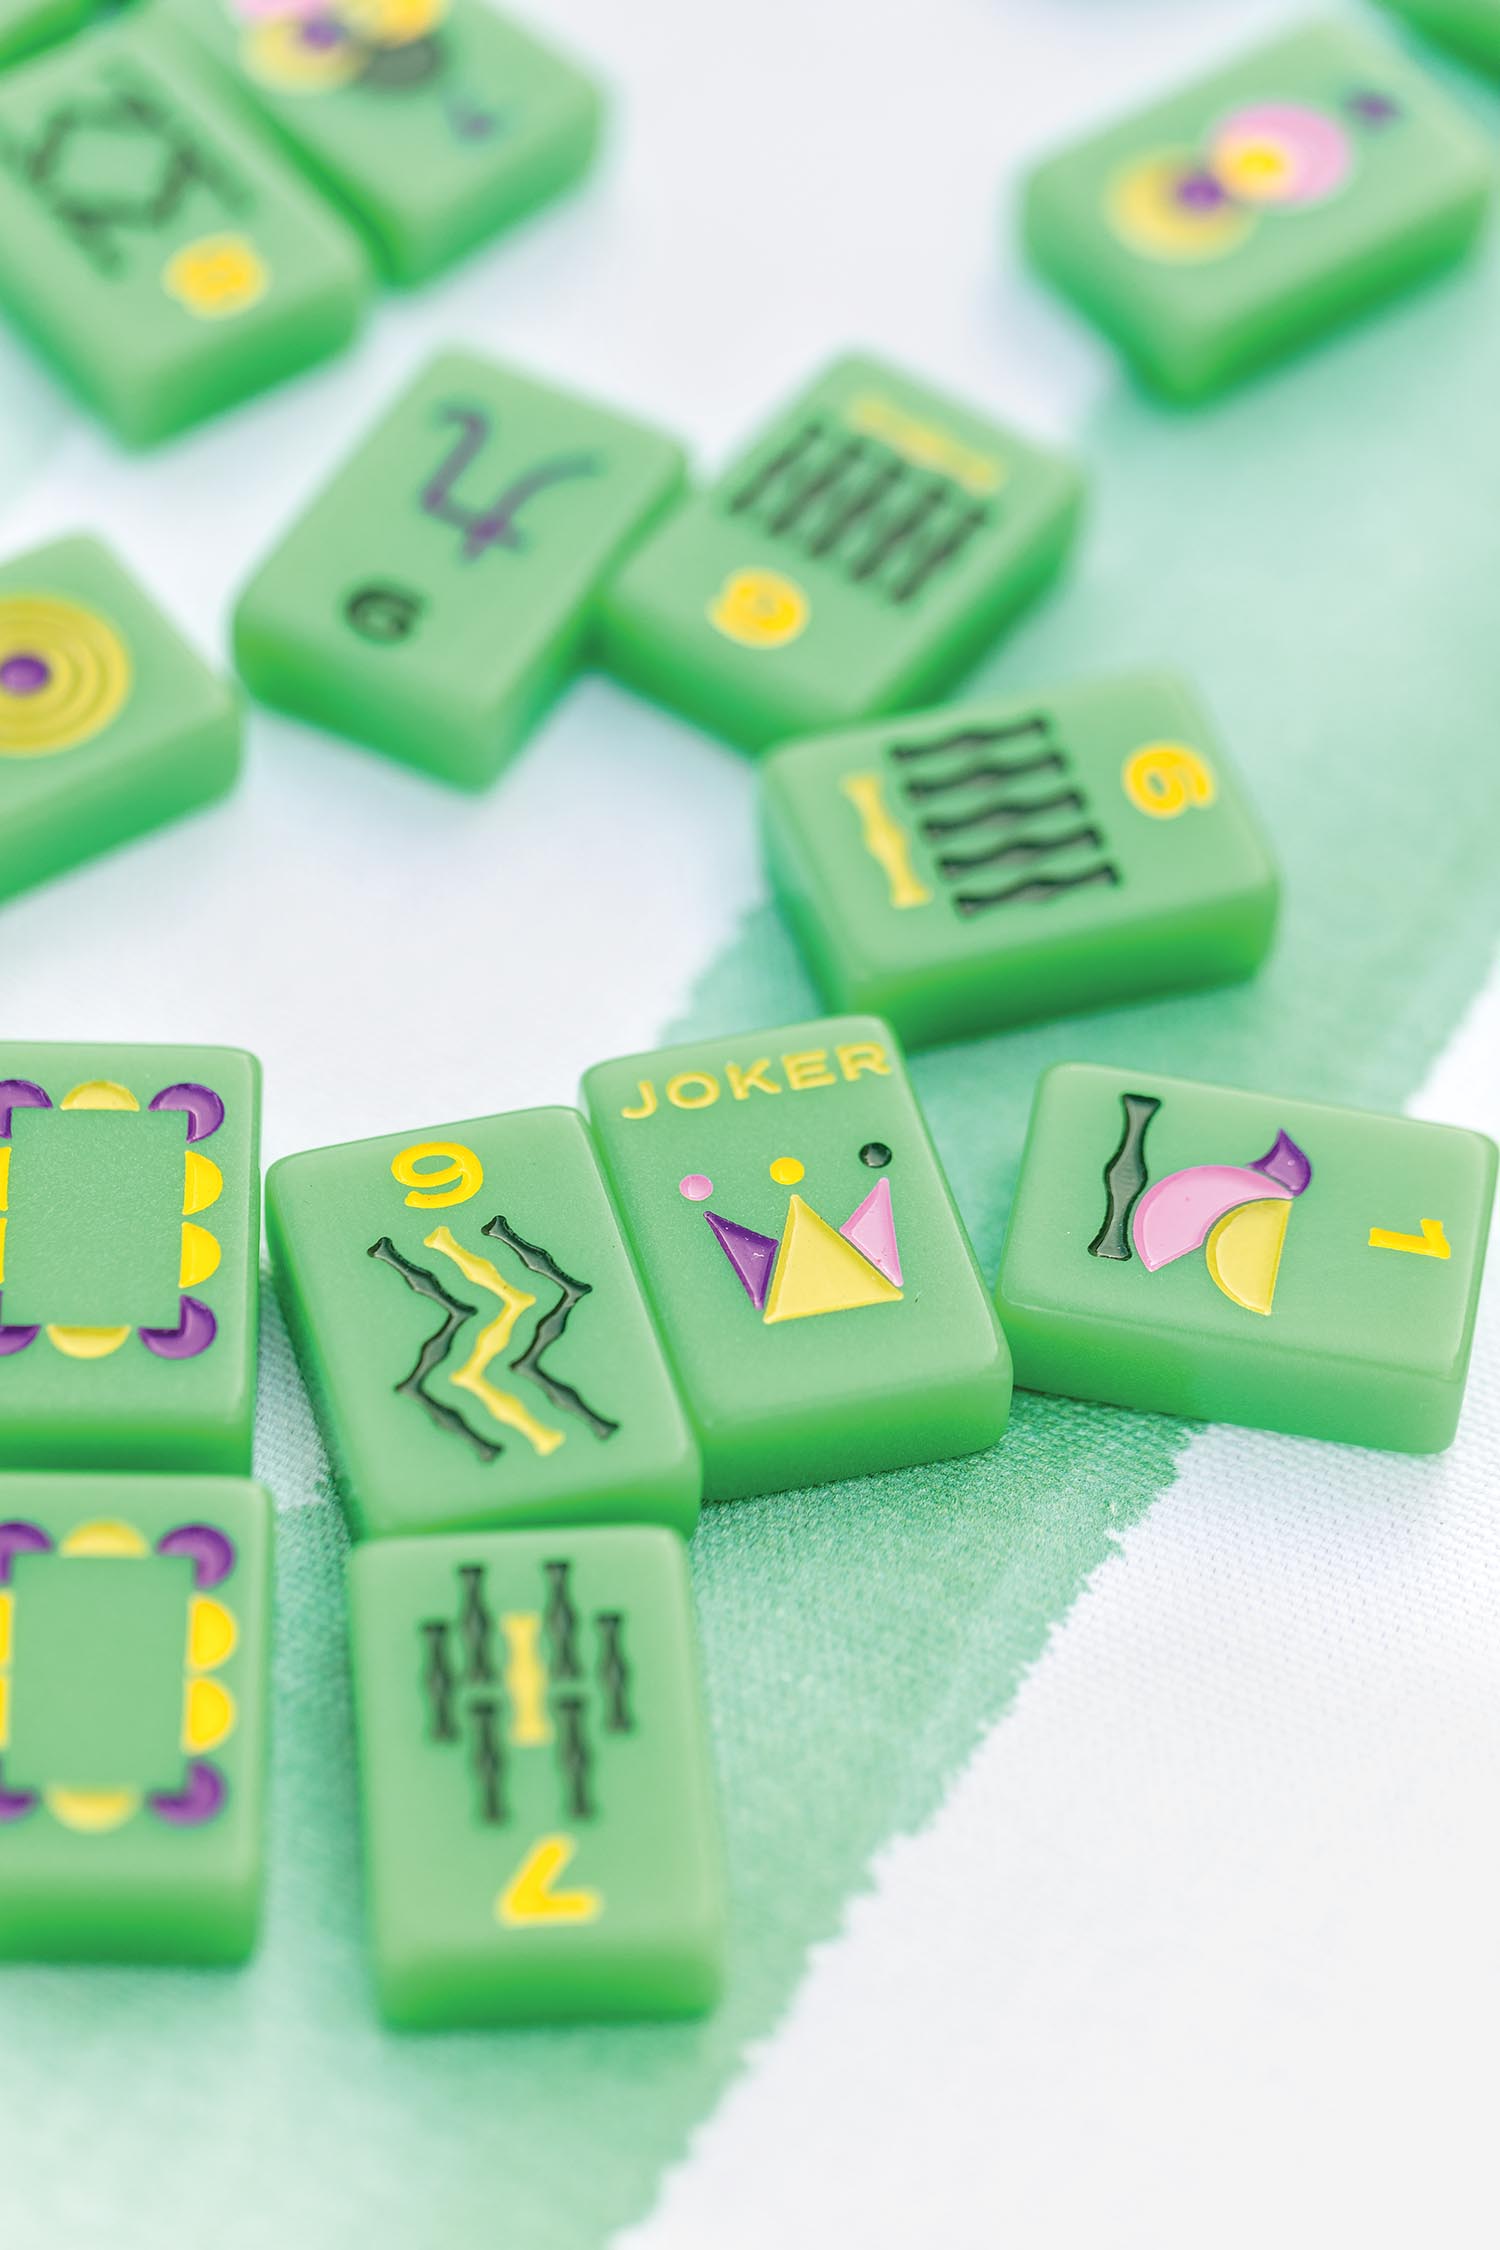 Green Mahjong tiles scattered over a striped tablecloth.